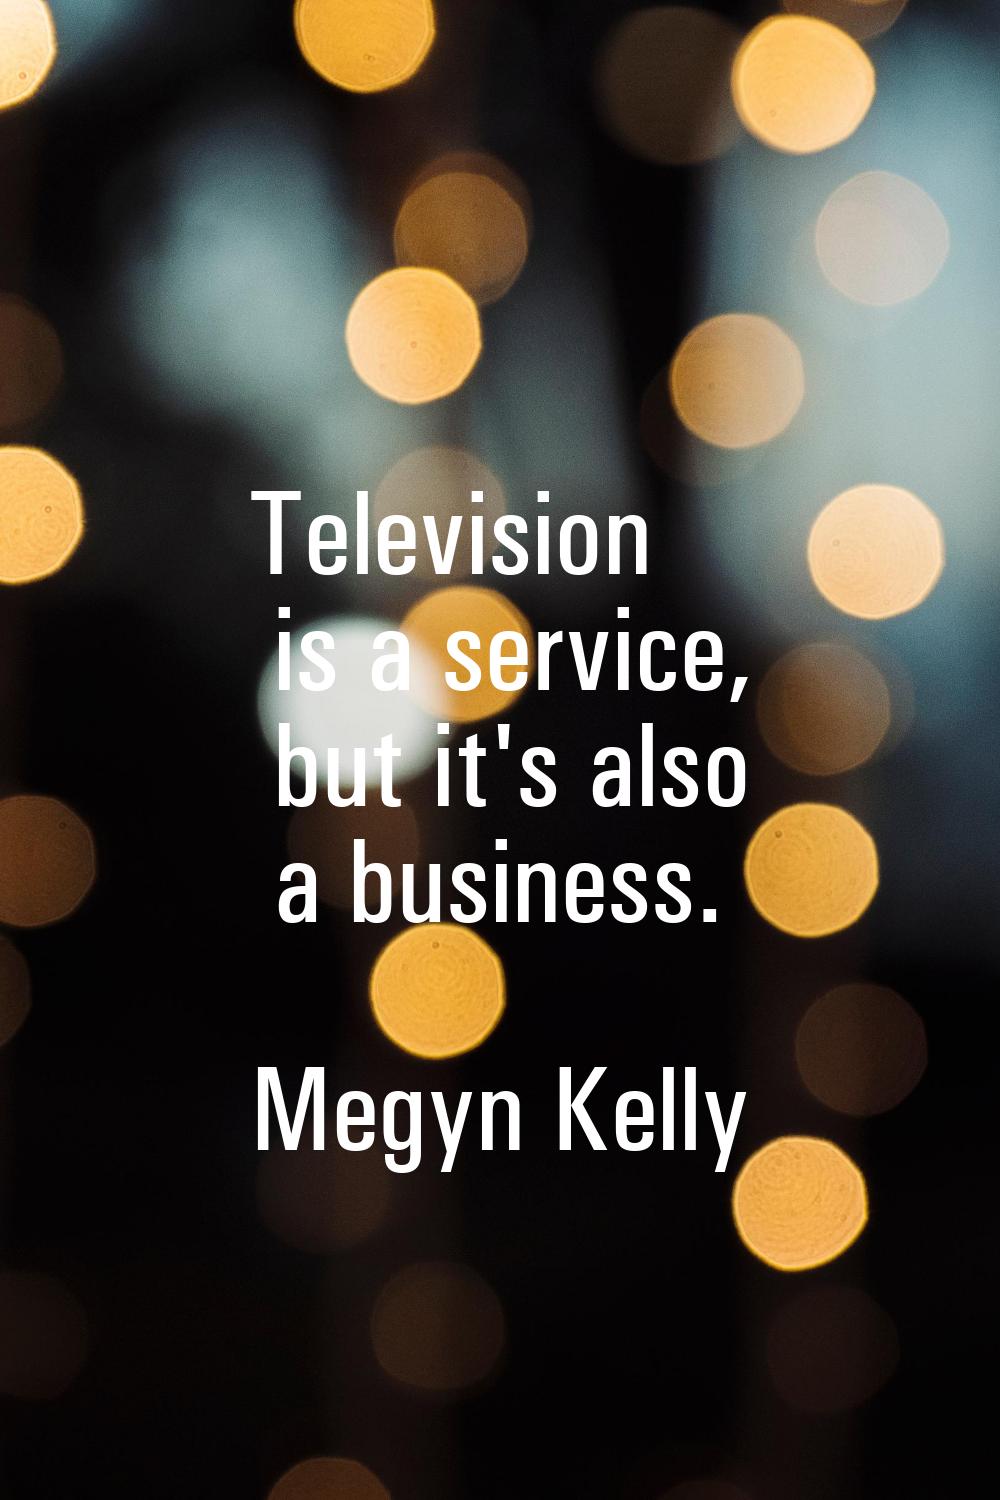 Television is a service, but it's also a business.